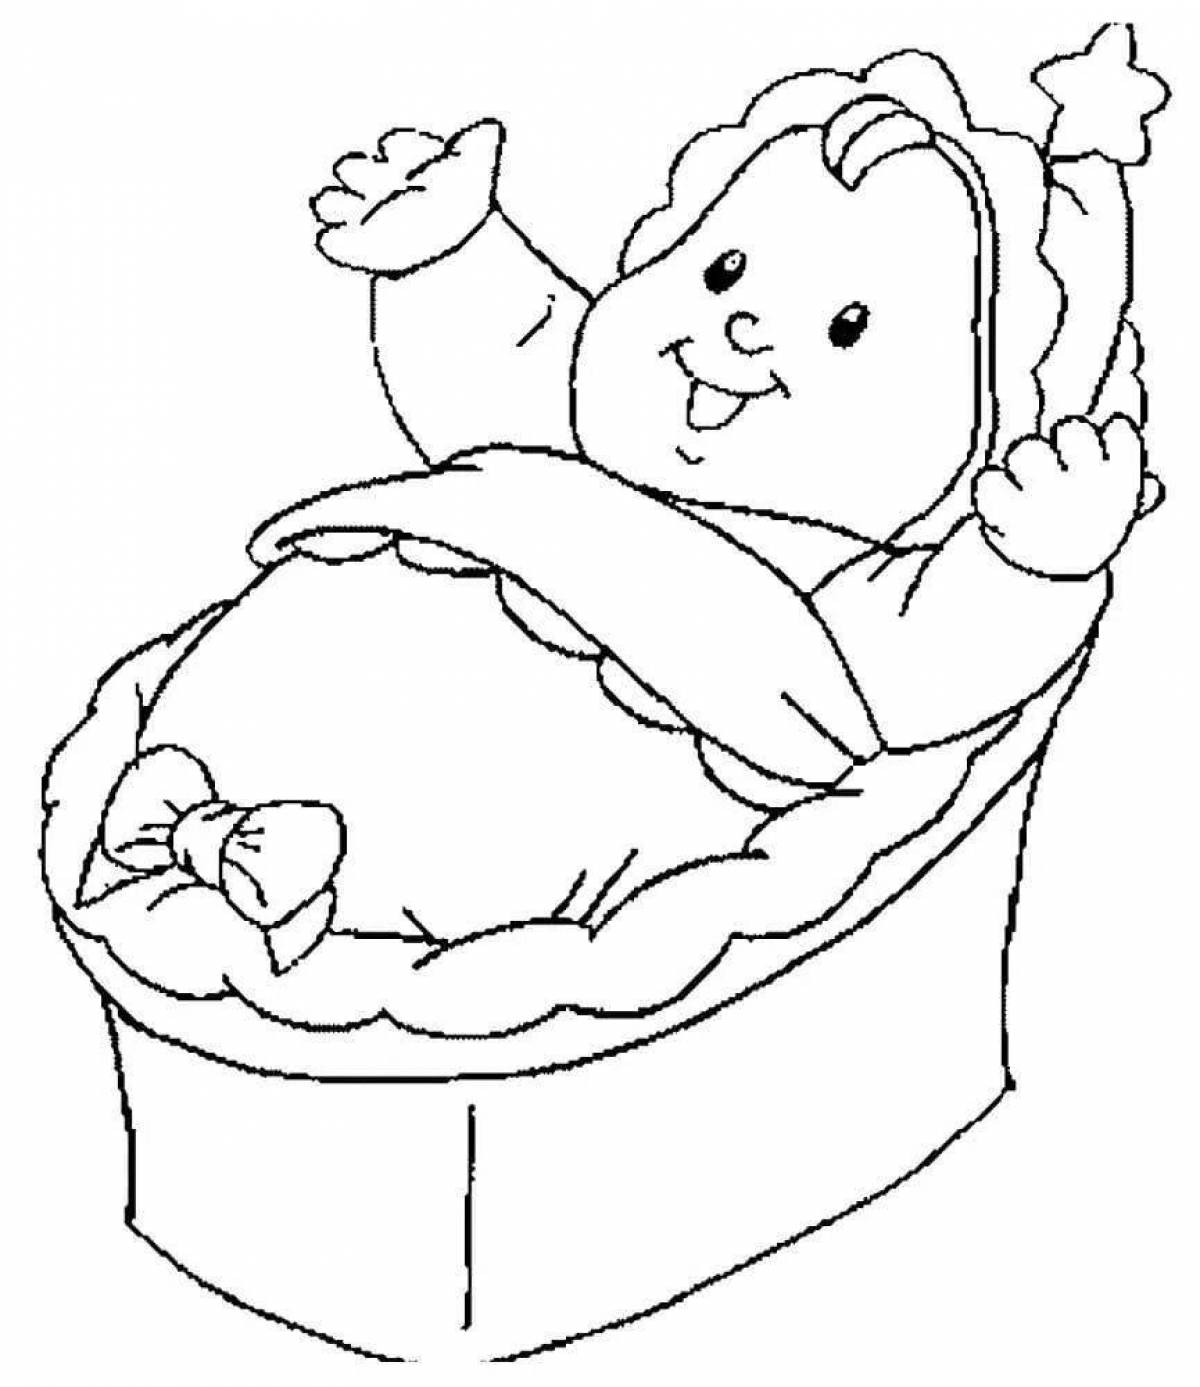 Amazing coloring pages for dolls